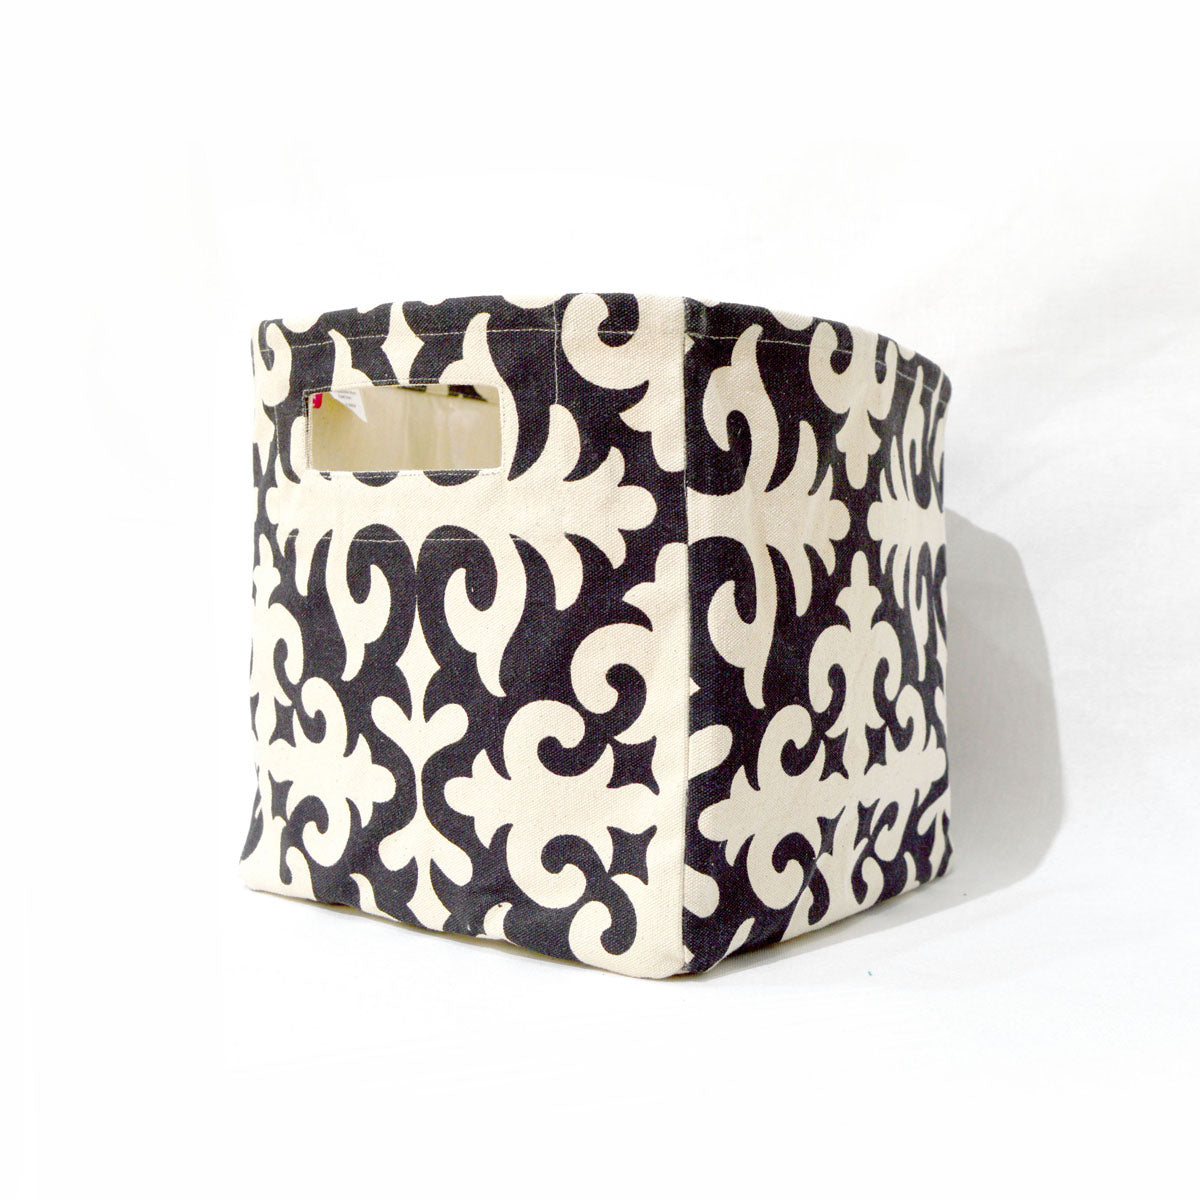 Square Storage basket, cotton canvas fabric, floral print, black and white, sizes available